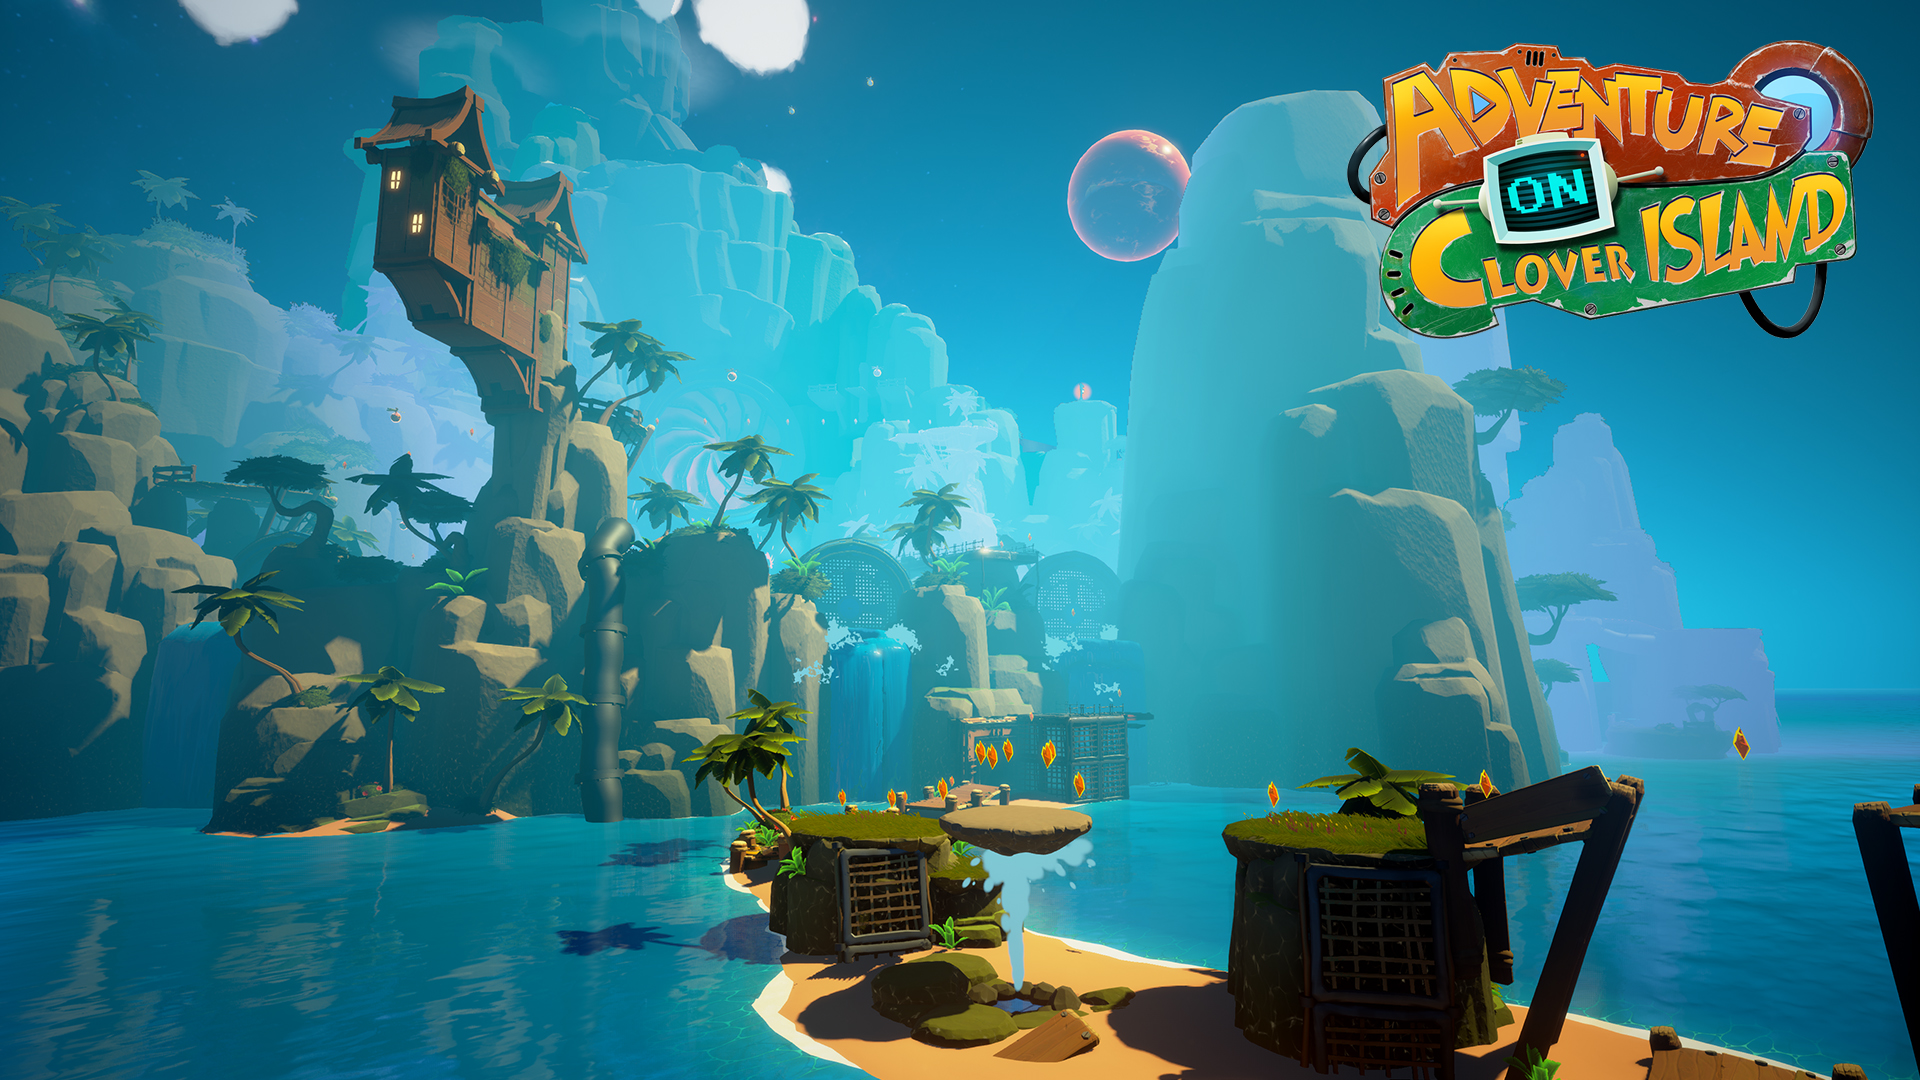 The game looks really pretty, reminding me of Ratchet & Clank a lot